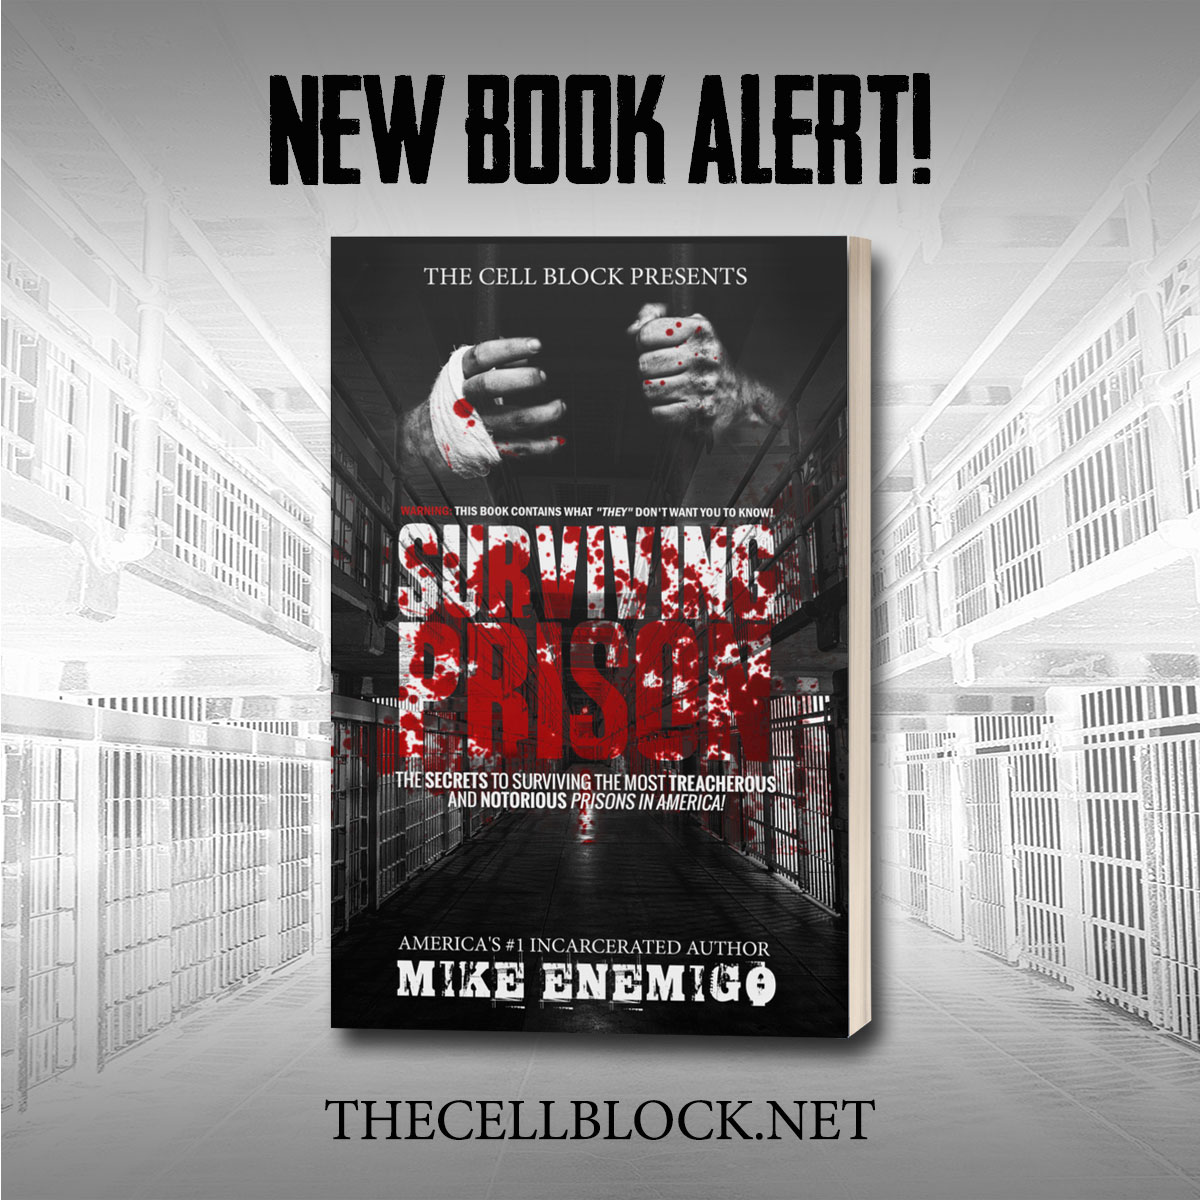 THE MIKE ENEMIGO STORY: HOW ONE PRISONER IS CHANGING THE GAME, ONE BOOK AT A TIME